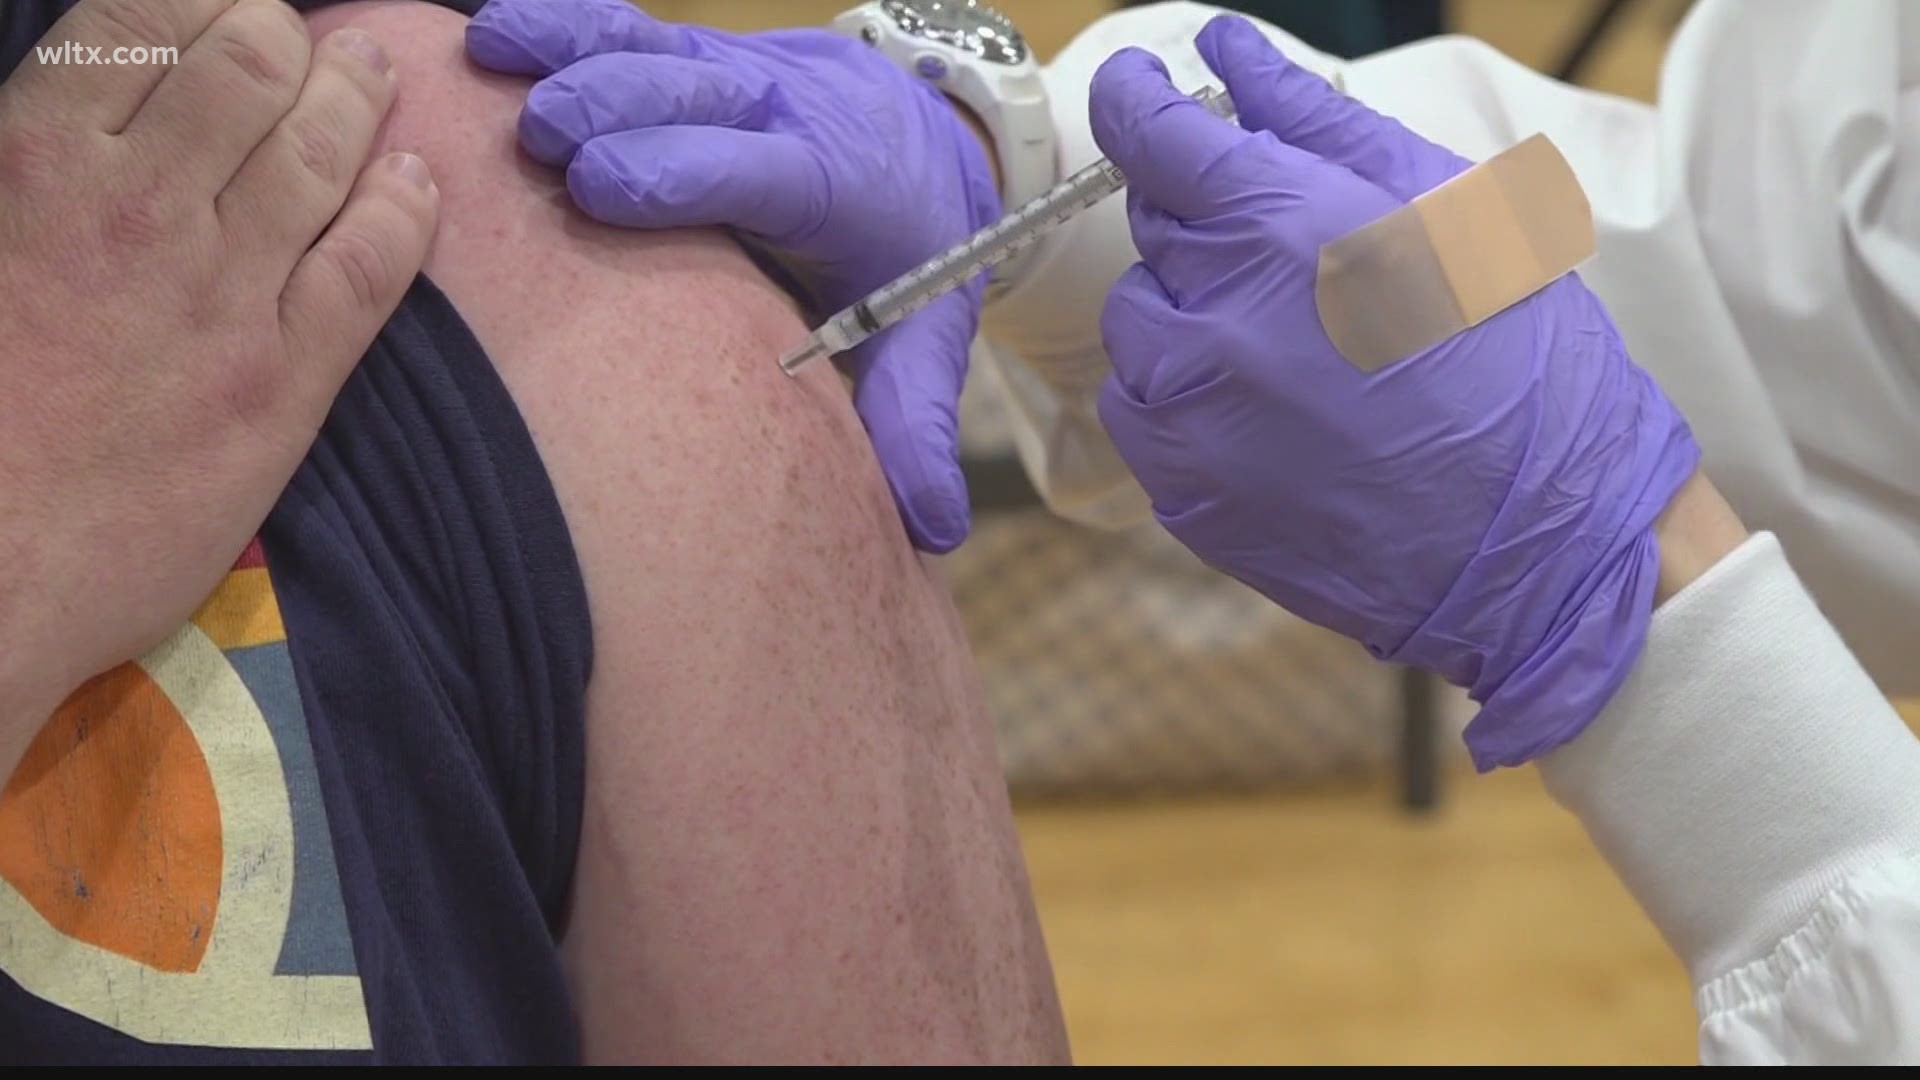 The one shot vaccine has been "paused" in South Carolina as it has been found in rare cases to cause blood clots.